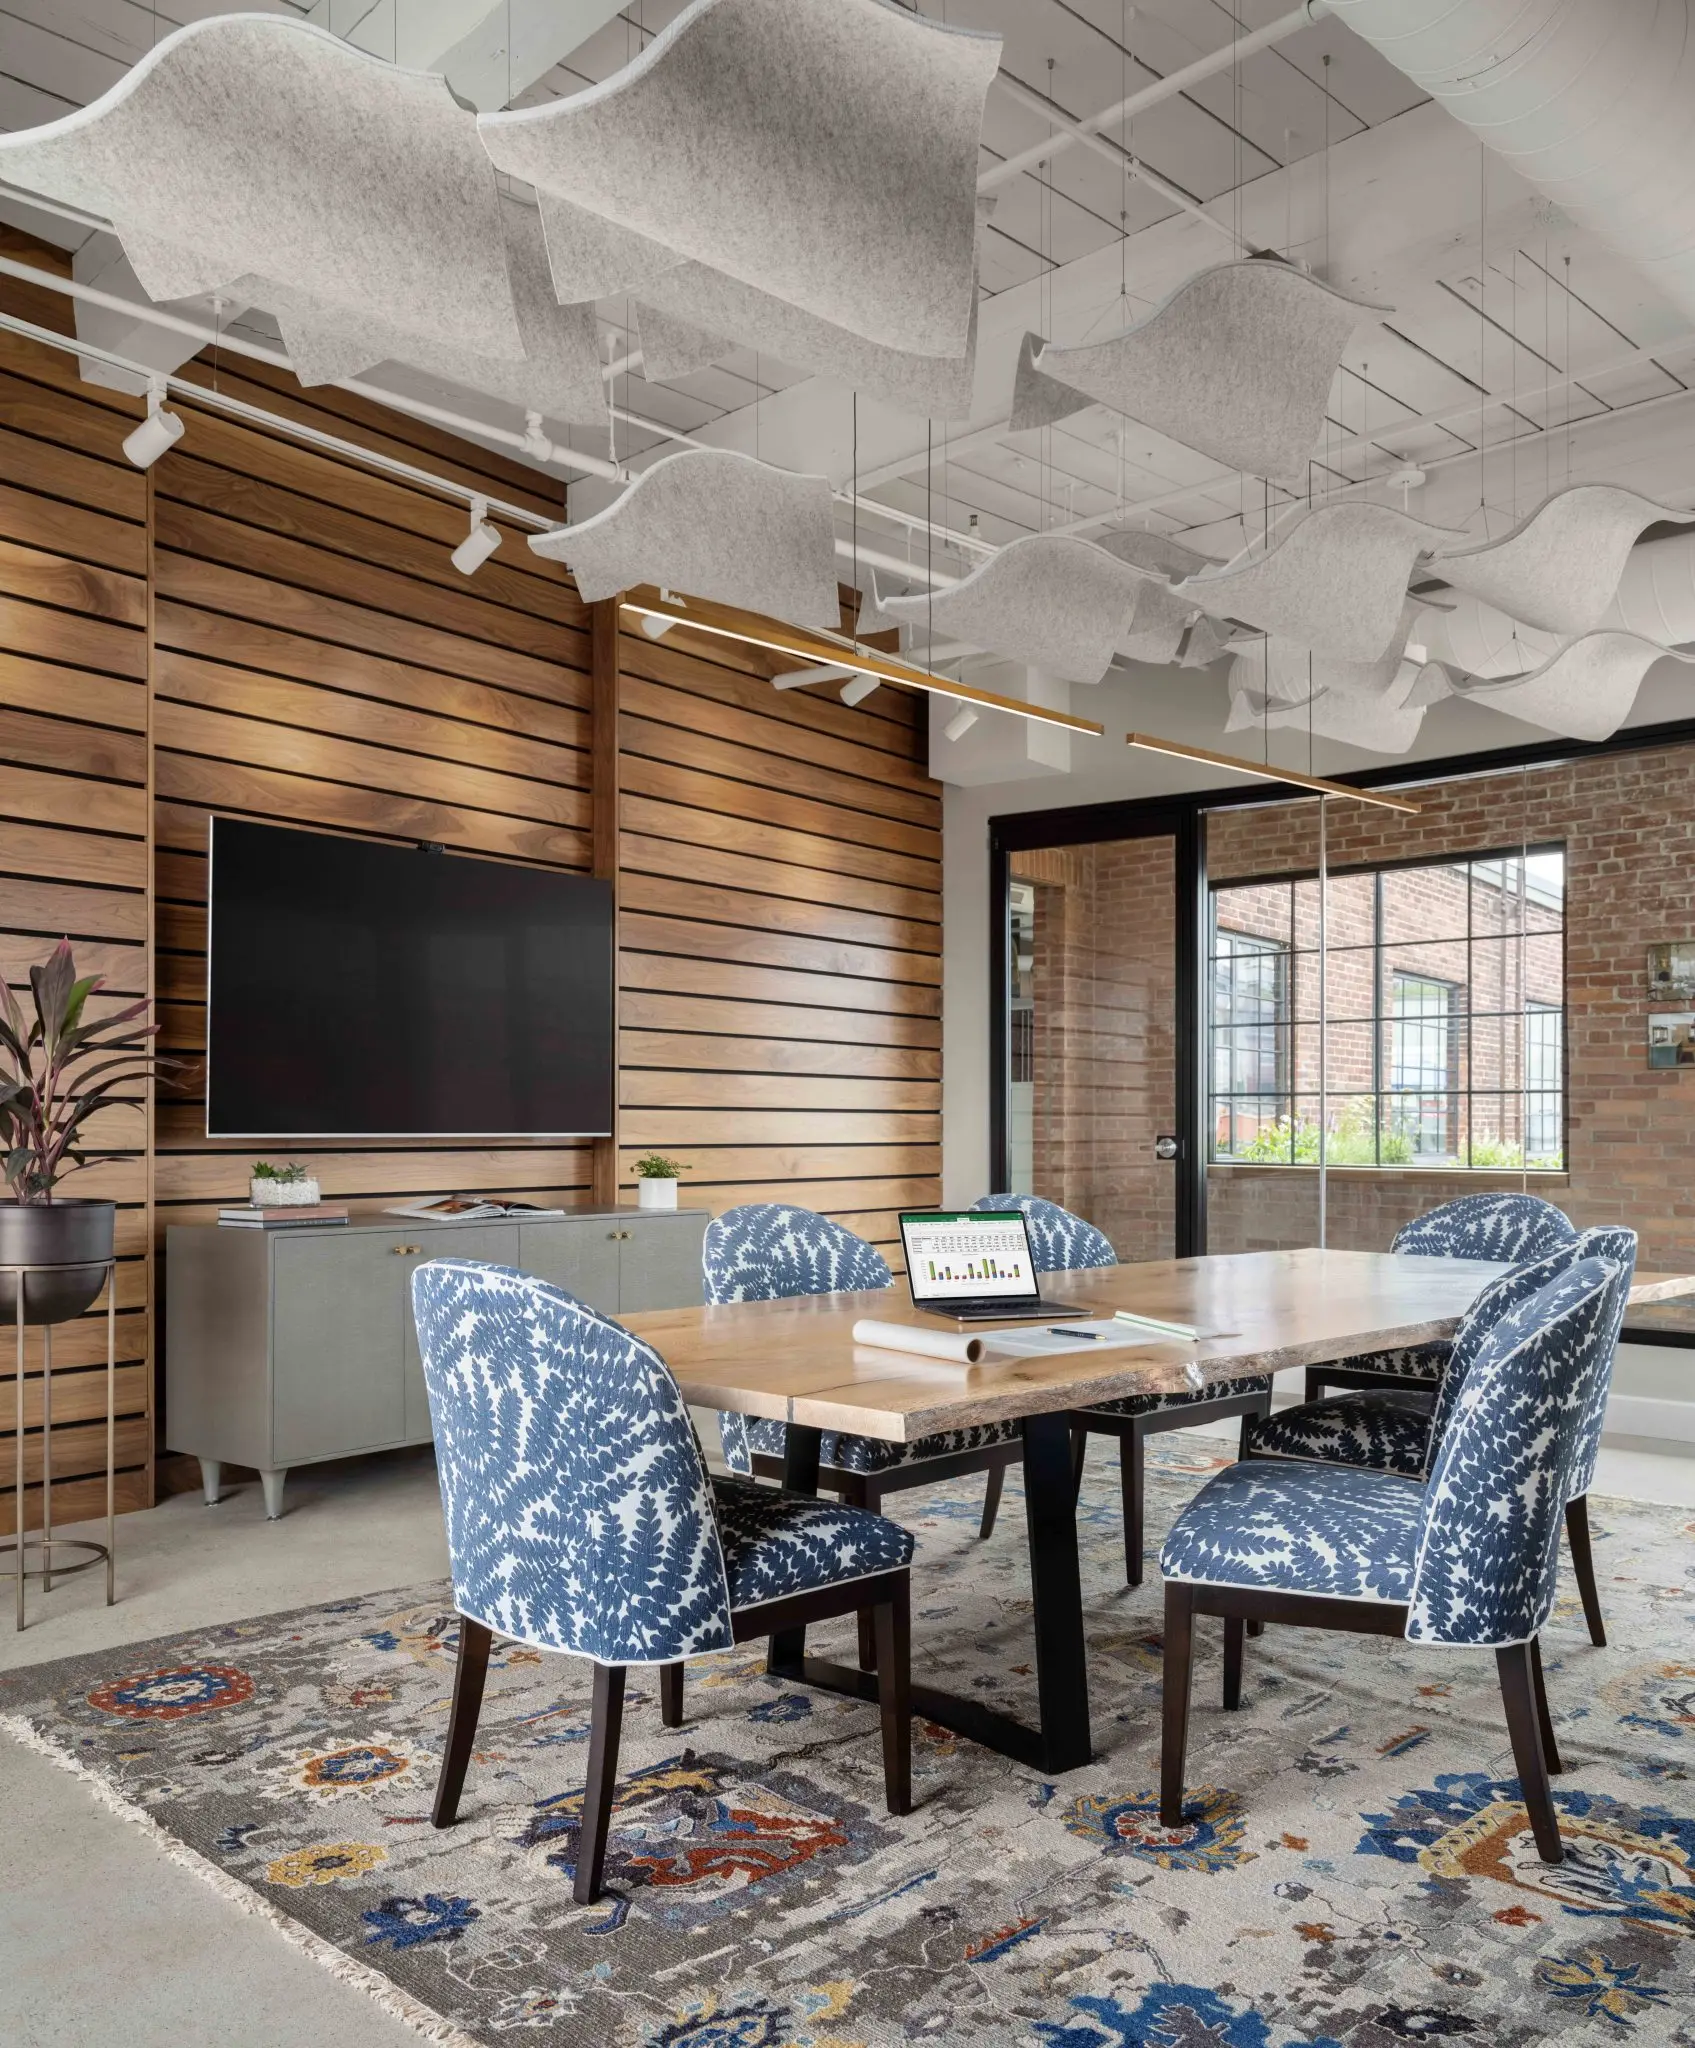 Knickerbocker Group's Portland, Maine conference room in renovated warehouse